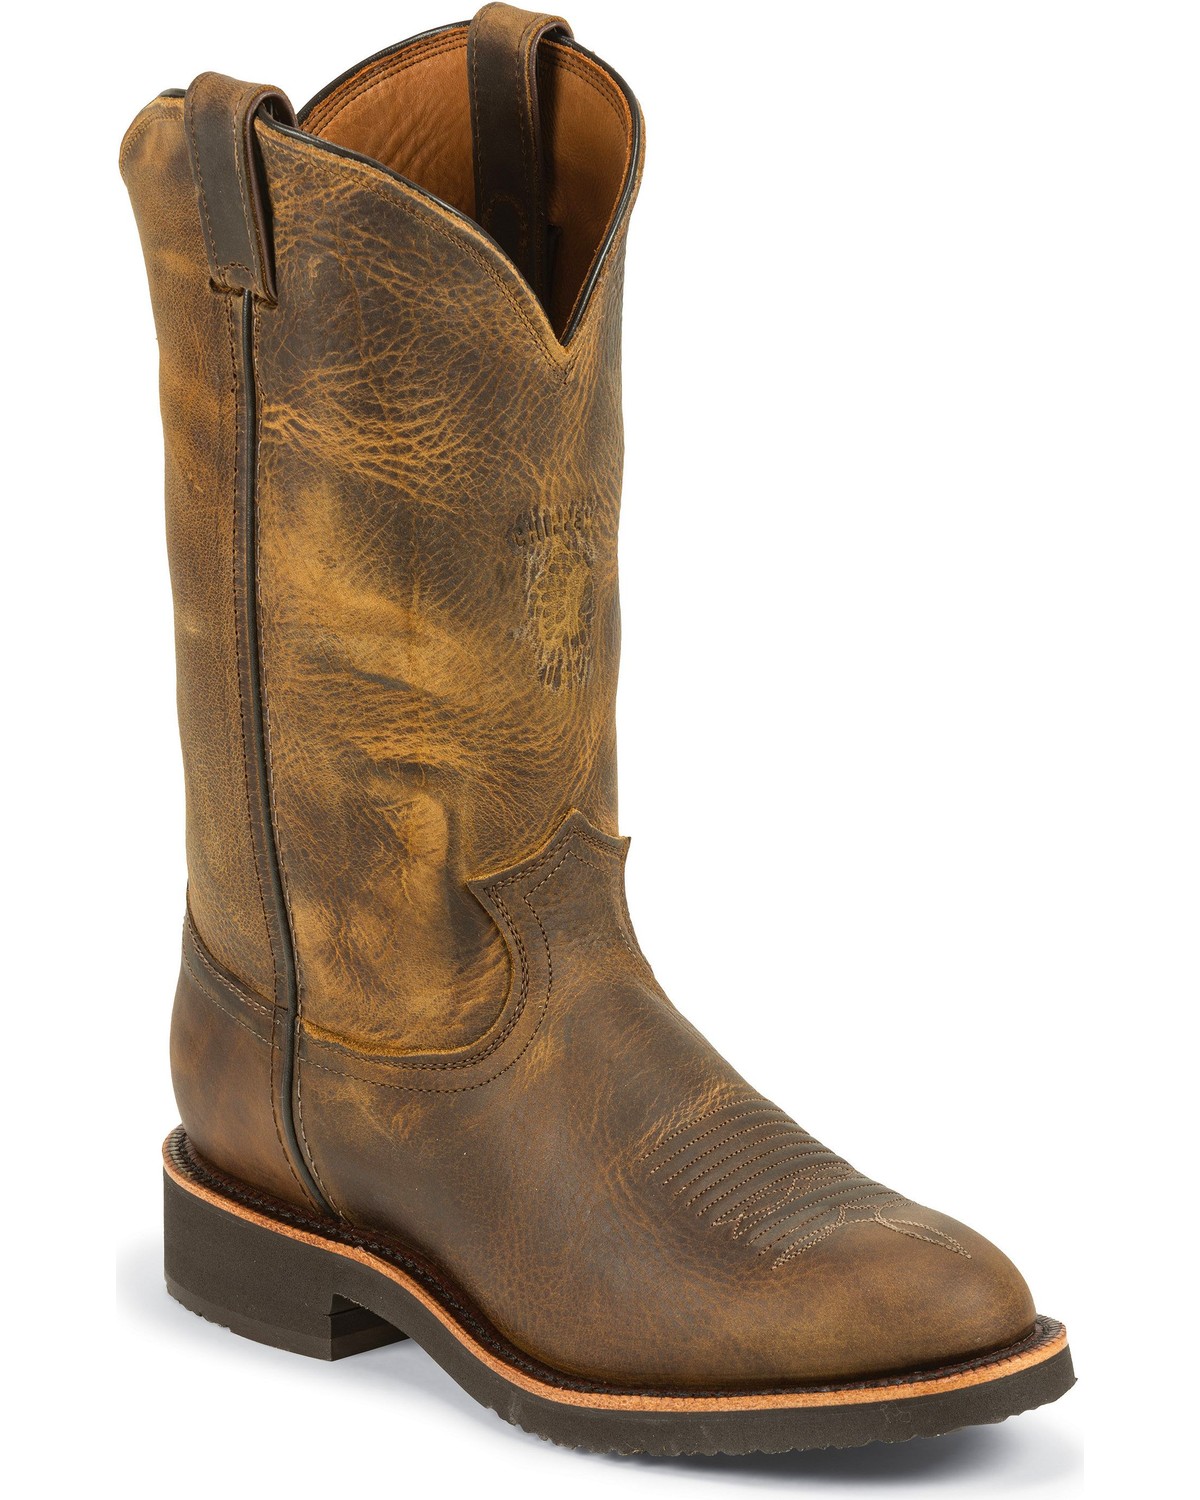 Chippewa Men's Arroyos Round Toe Pull On Outdoor Western Boots | Boot Barn